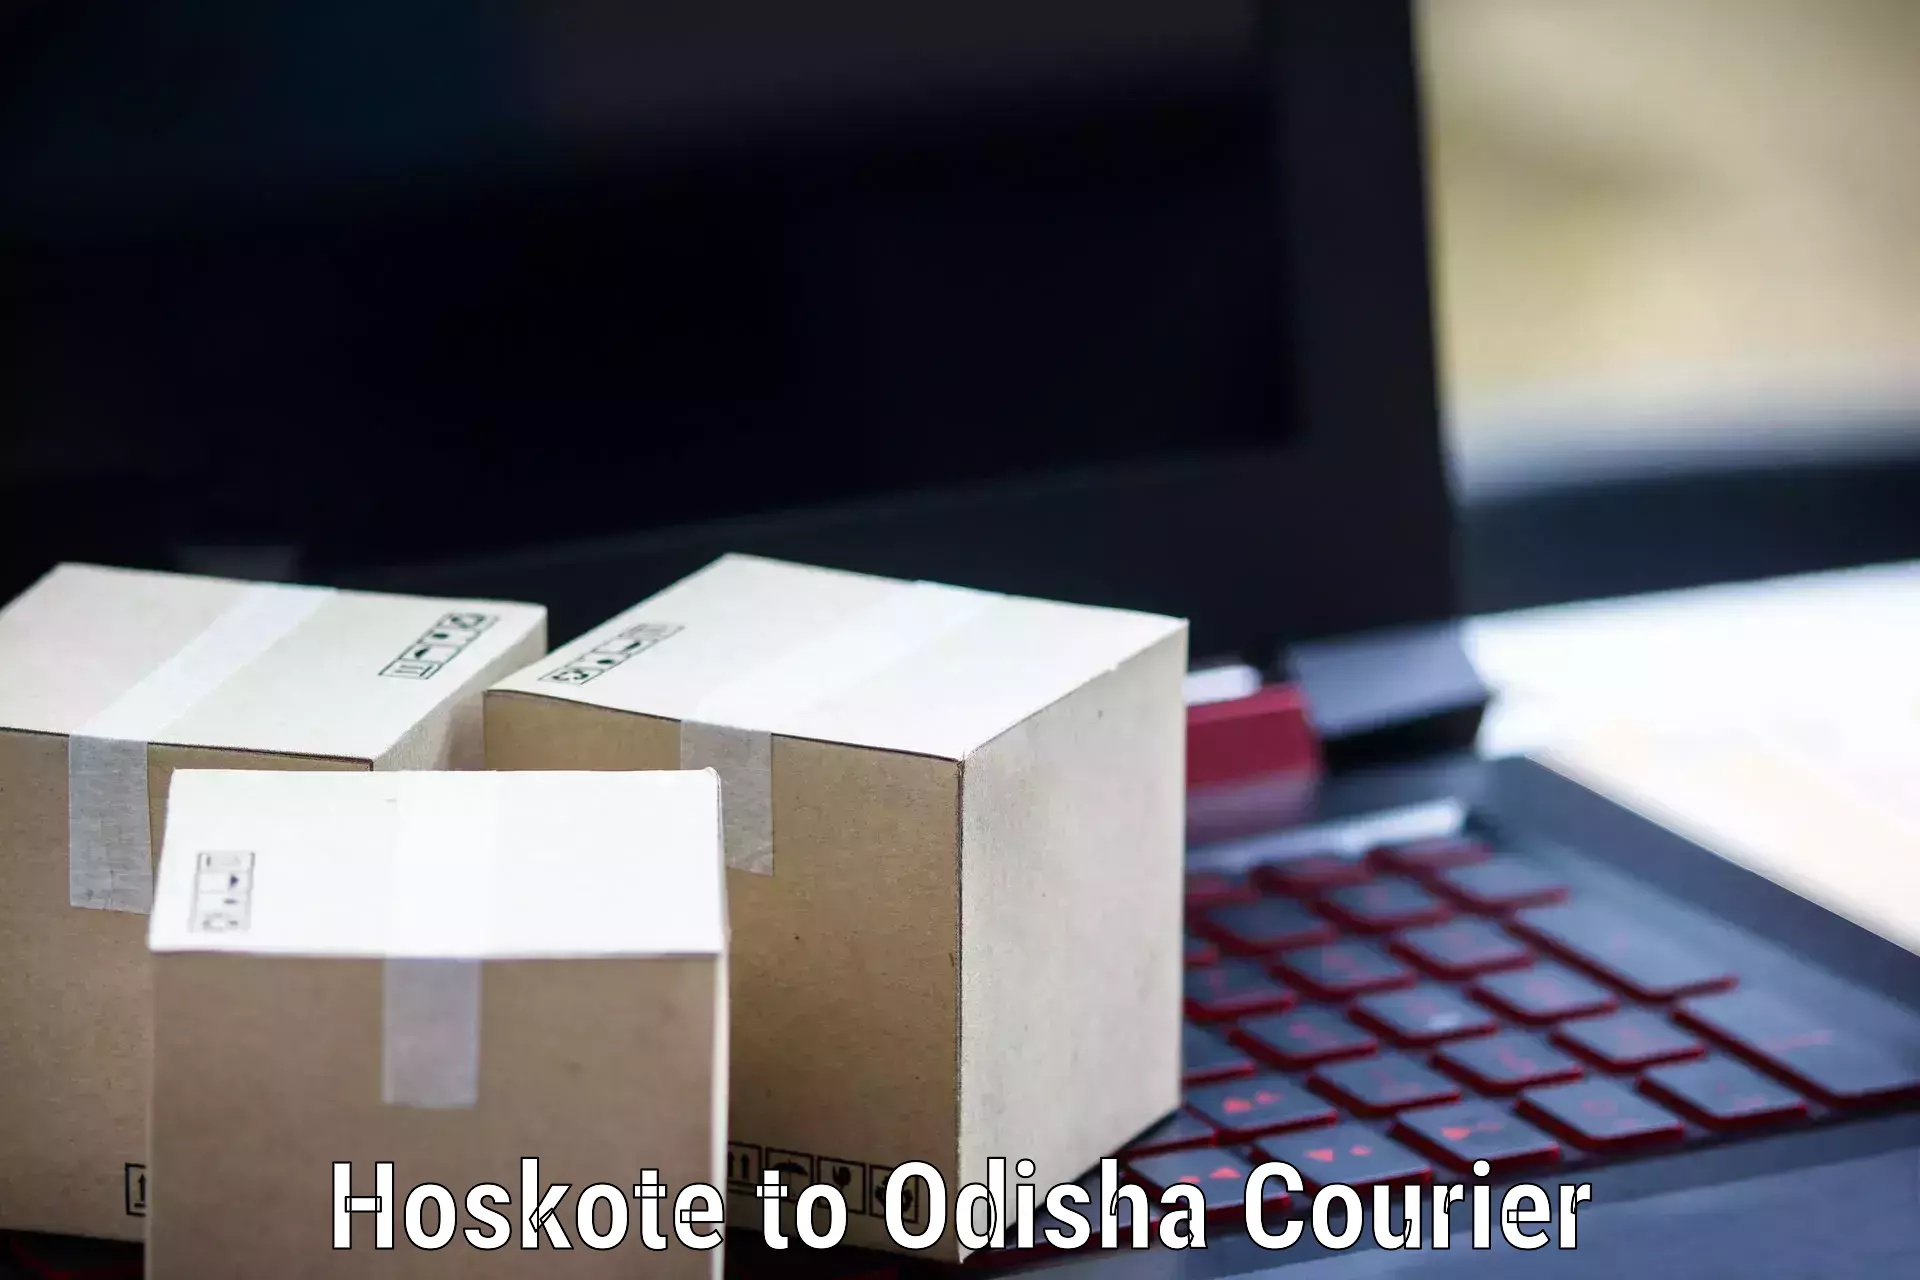 Courier service comparison Hoskote to Kalinga Institute of Industrial Technology Bhubaneswar